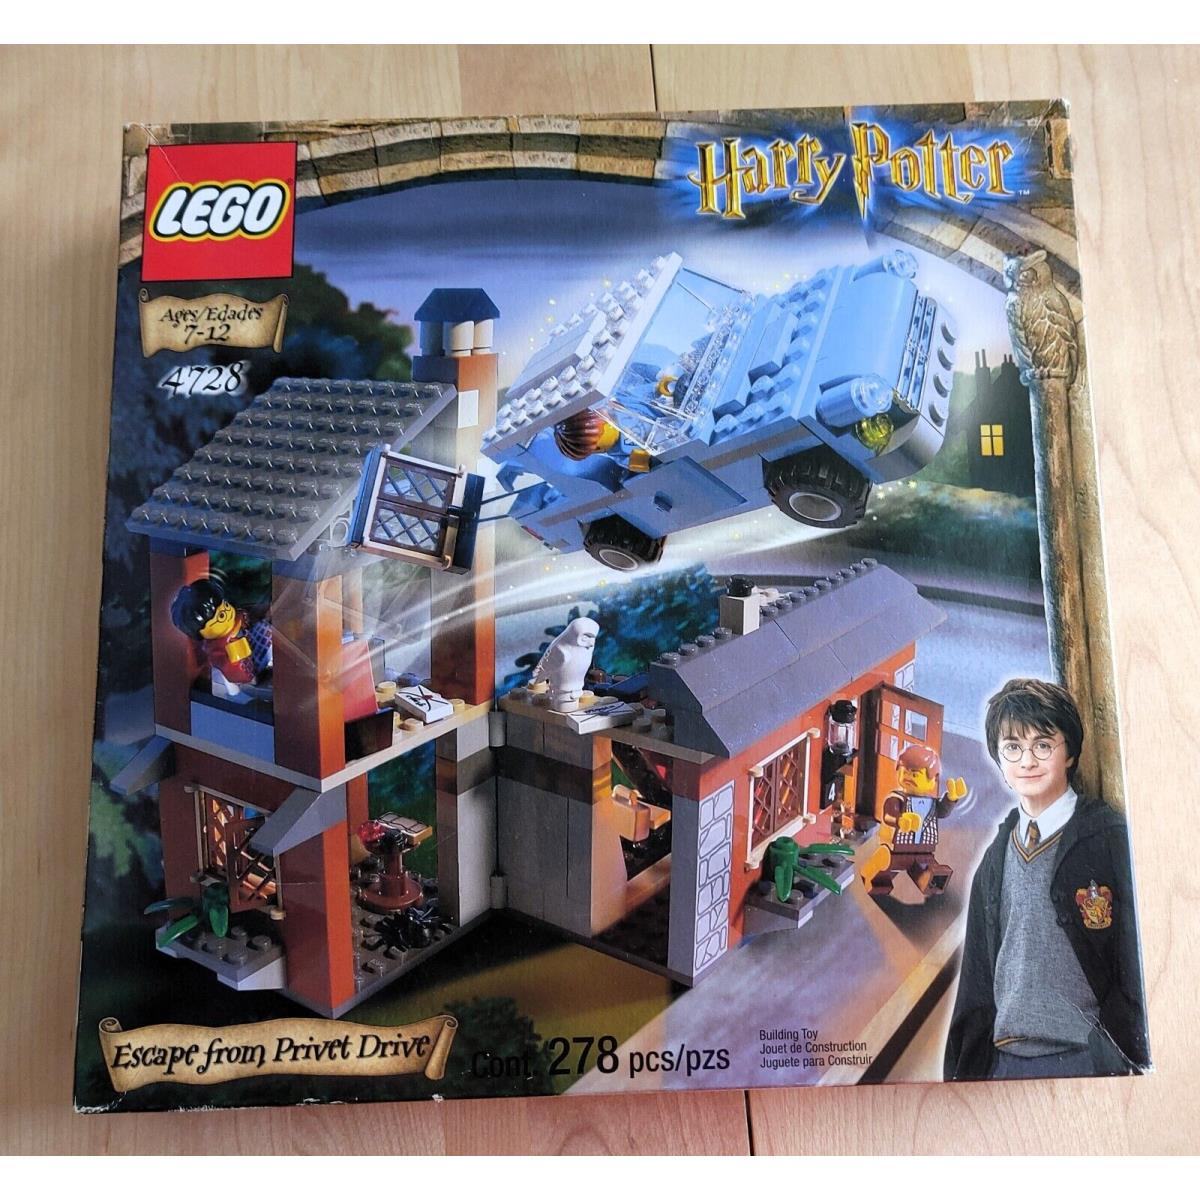 Lego Harry Potter Escape From Privet Drive 4728 In 2002 Retired